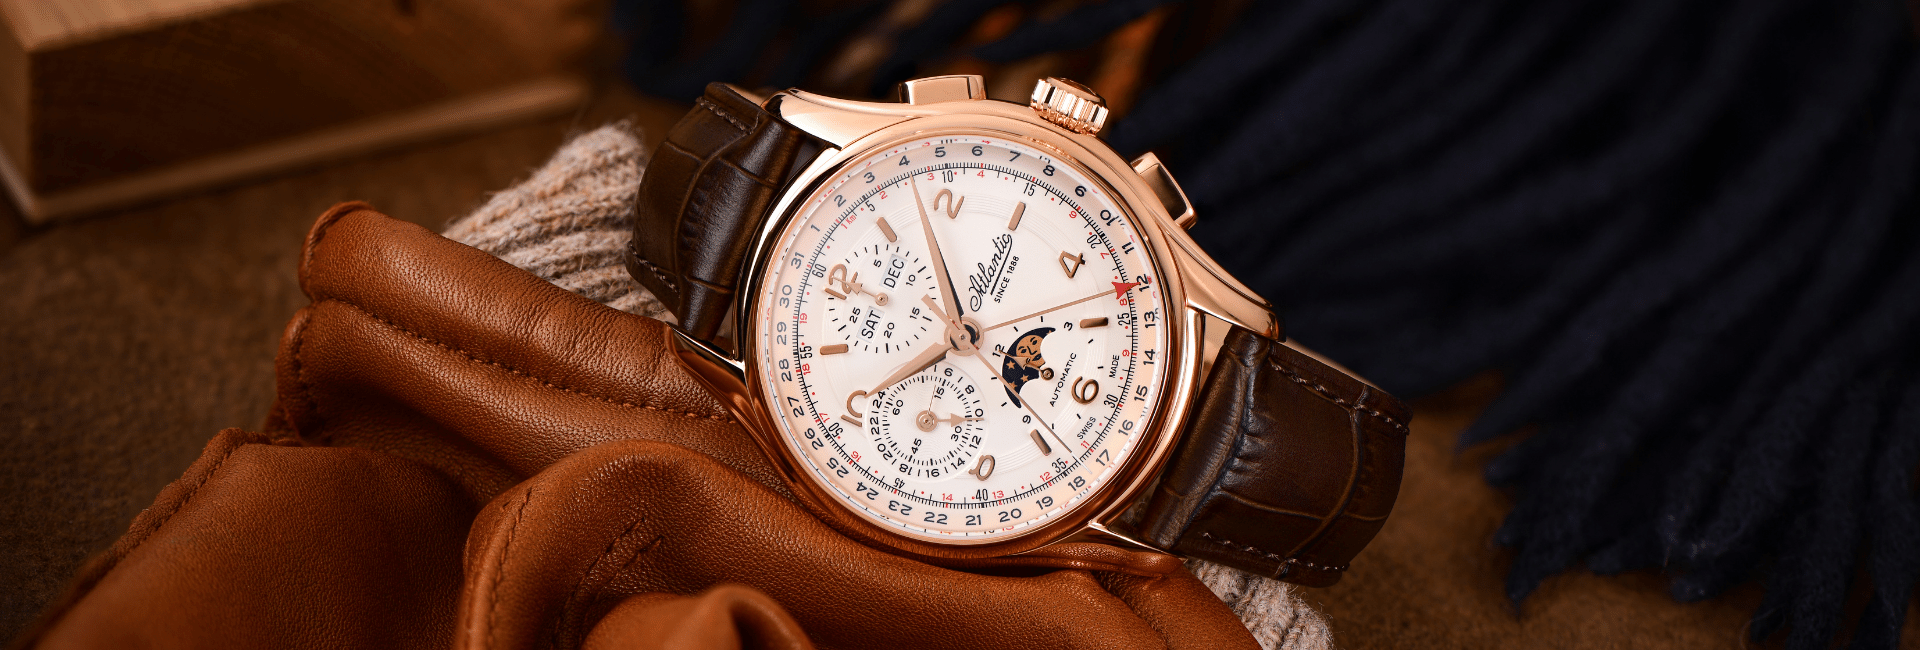 Worldmaster Moonphase Limited Edition Available Now.